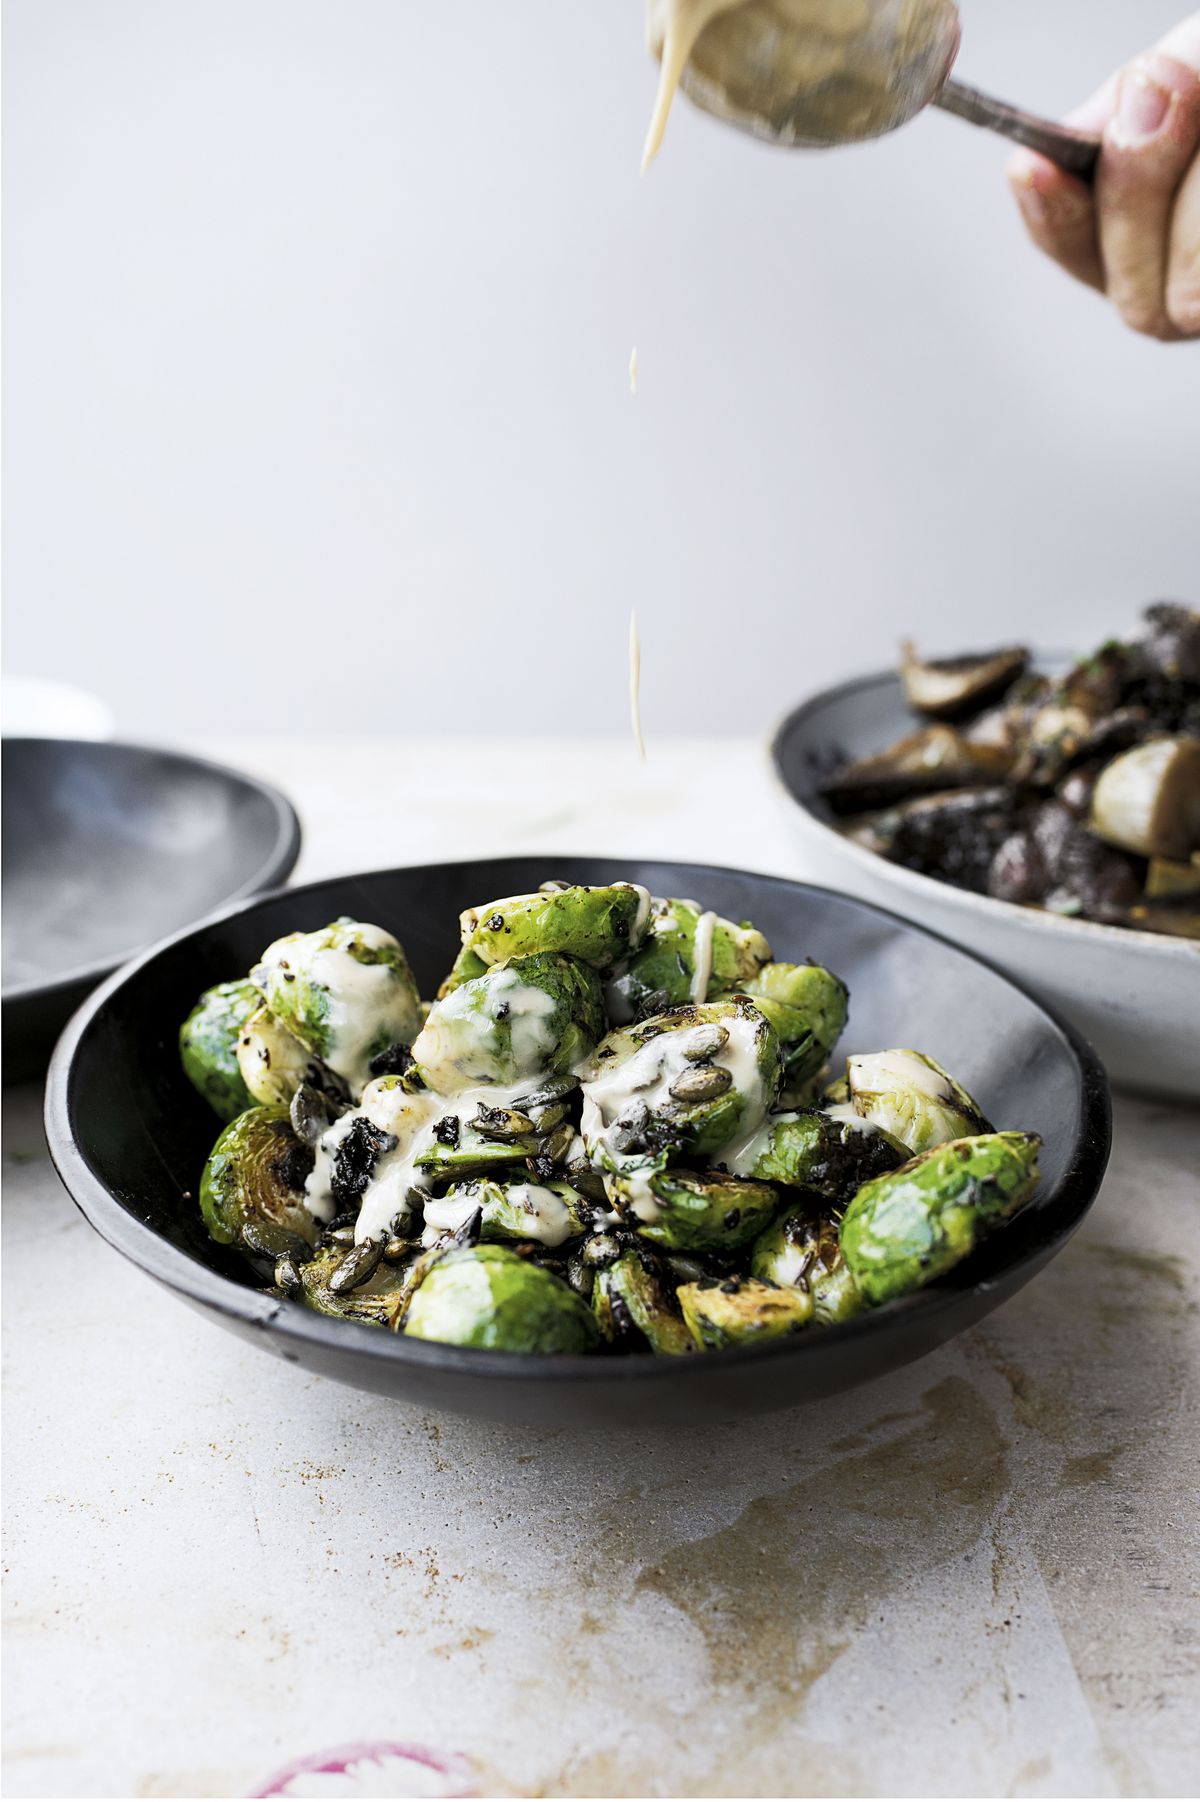 Ottolenghi’s Brussels Sprouts with Burnt Butter and Black Garlic